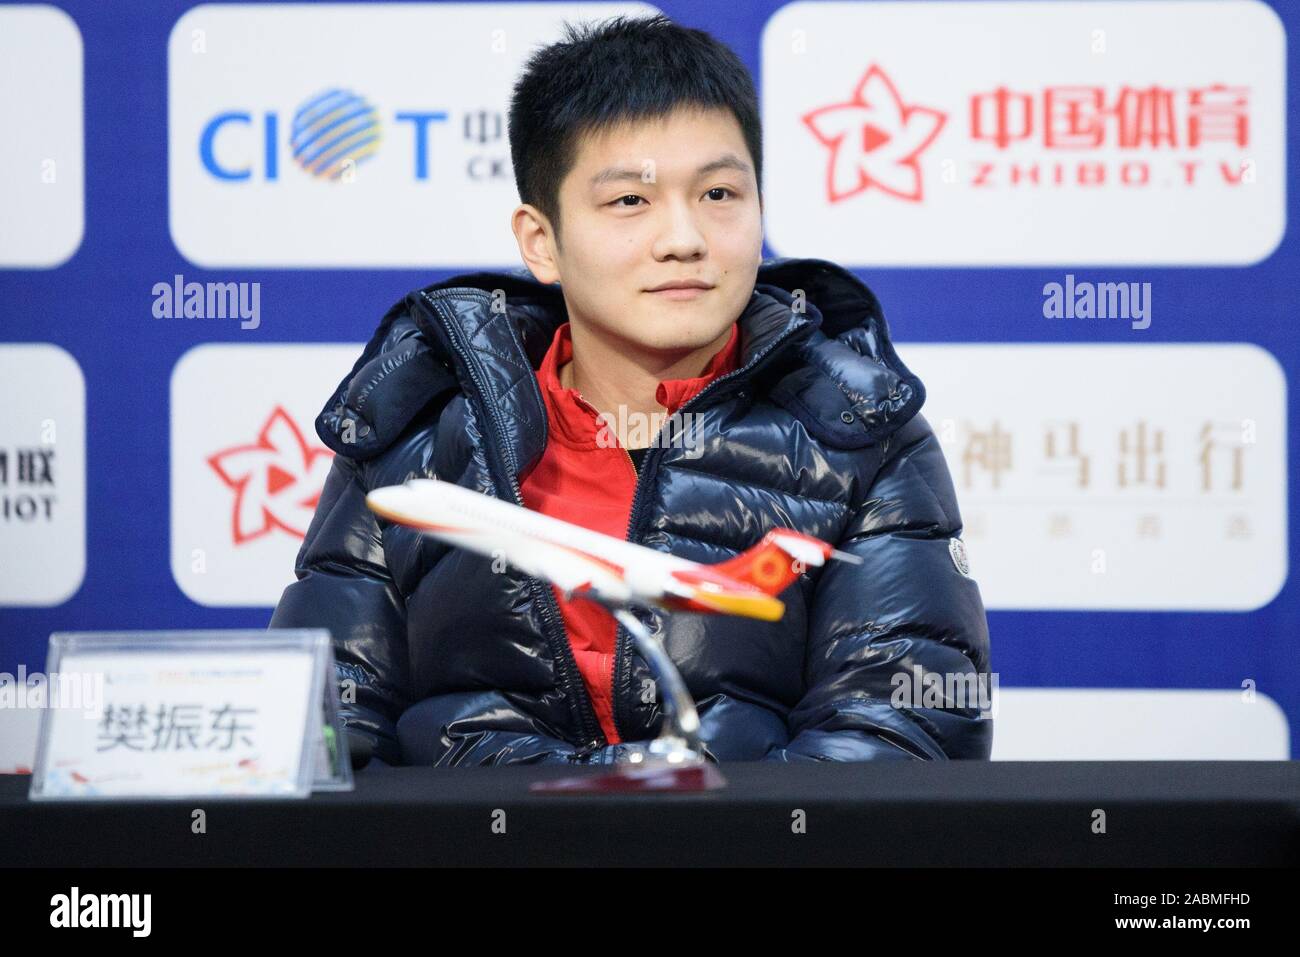 Chengdu, Chengdu, China. 28th Nov, 2019. Chengdu, CHINA-Chinese table tennis players Ma long, Fan Zhendong and German table tennis player Timo Boll attended the 2019 Men's Table Tennis World Cup fans' meeting in Chengdu, Sichuan province, Nov. 28, 2019. Credit: SIPA Asia/ZUMA Wire/Alamy Live News Stock Photo